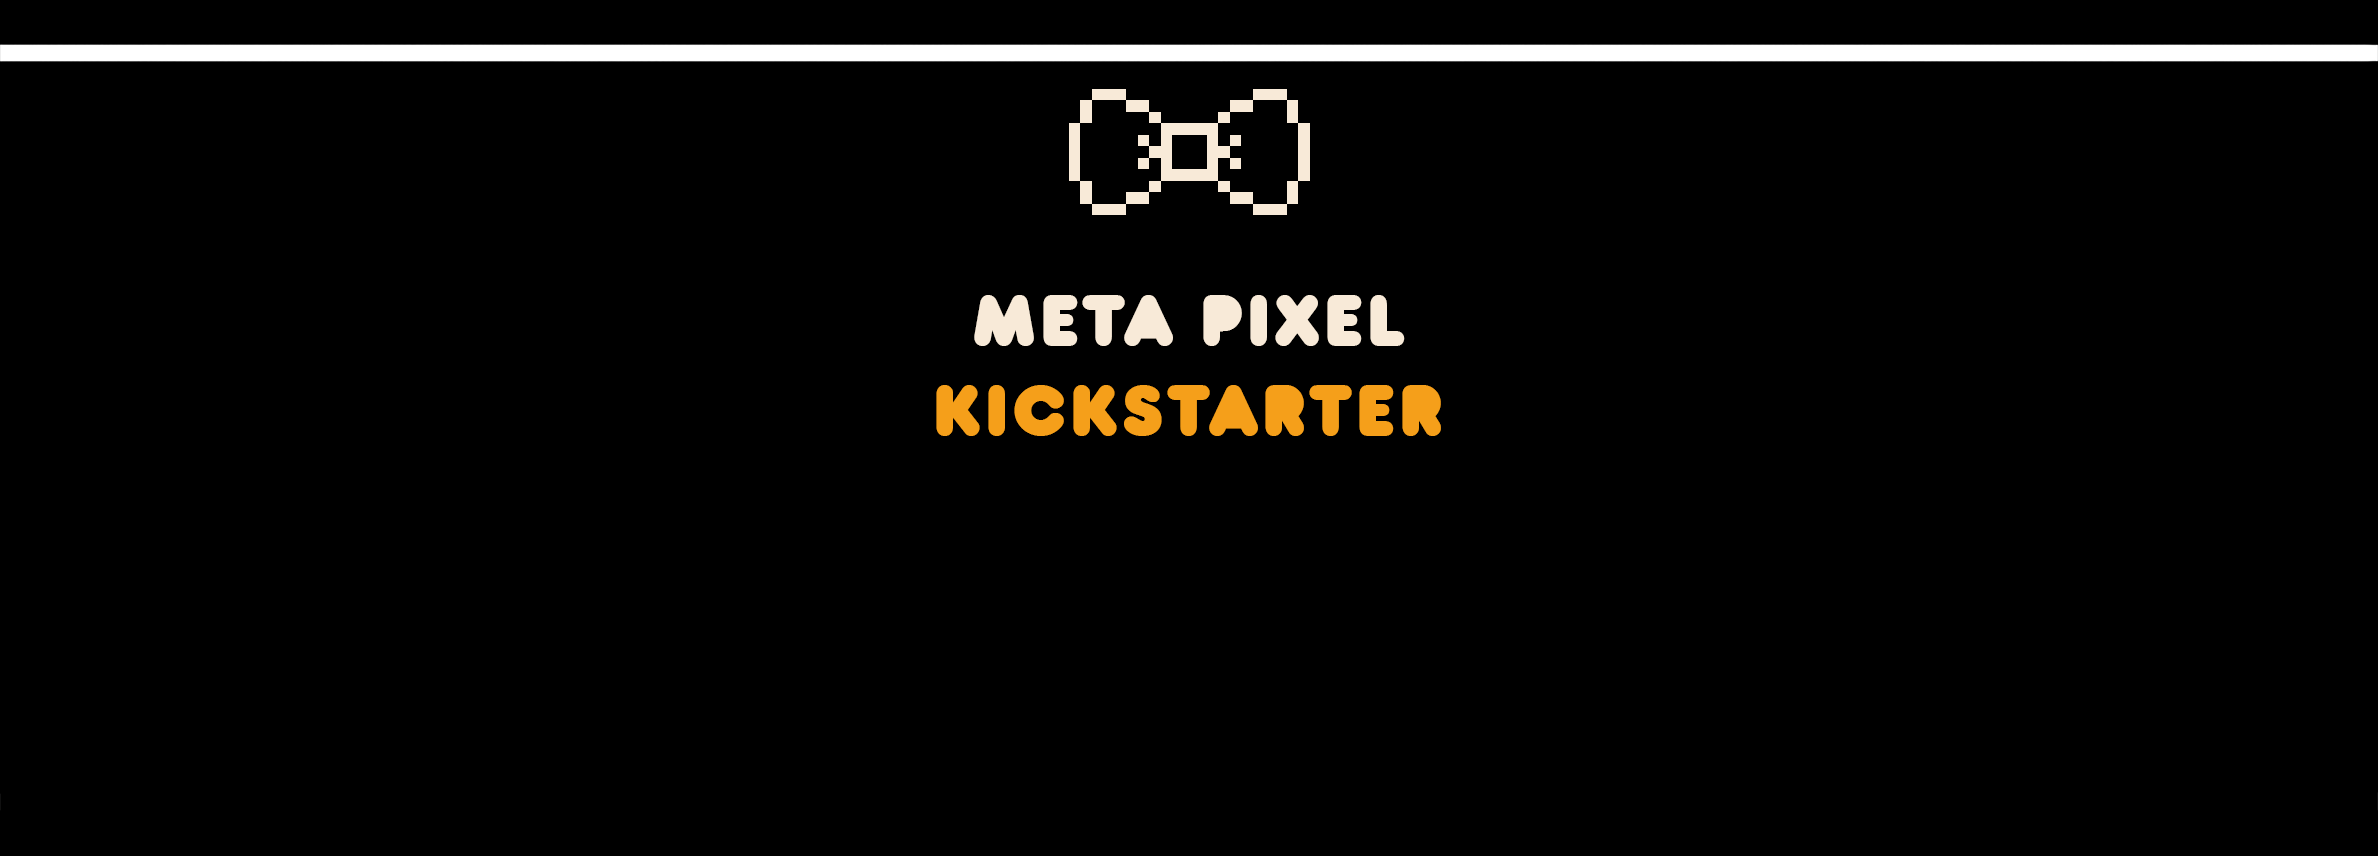 Article cover image for "How to Setup the Facebook Pixel for Kickstarter"